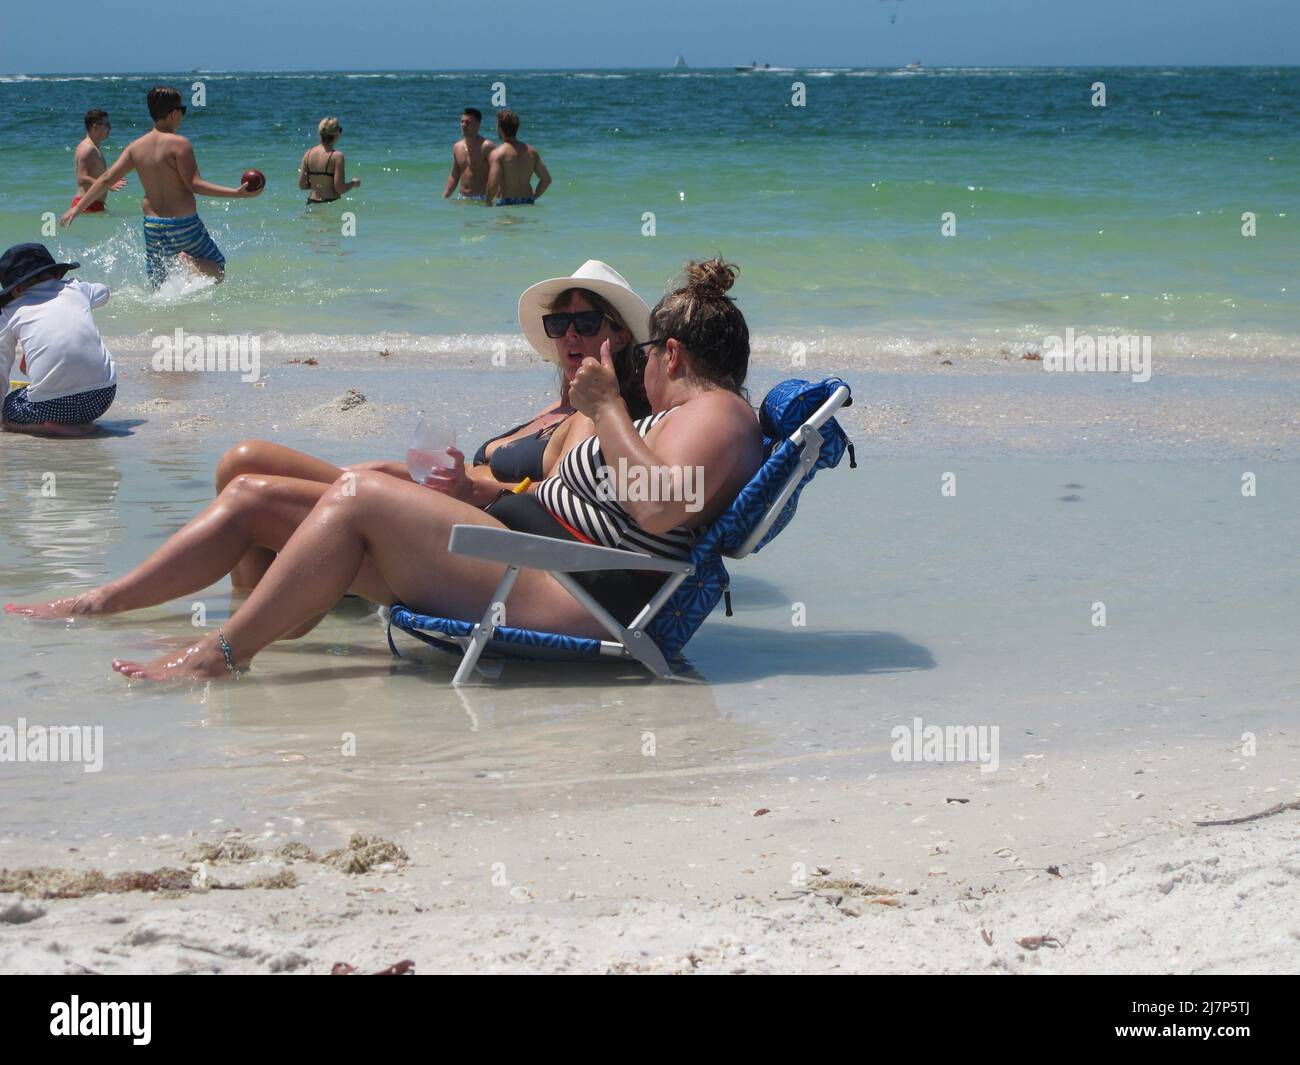 Young women enjoying the waves of the ocean waters on sun chairs Stock Photo